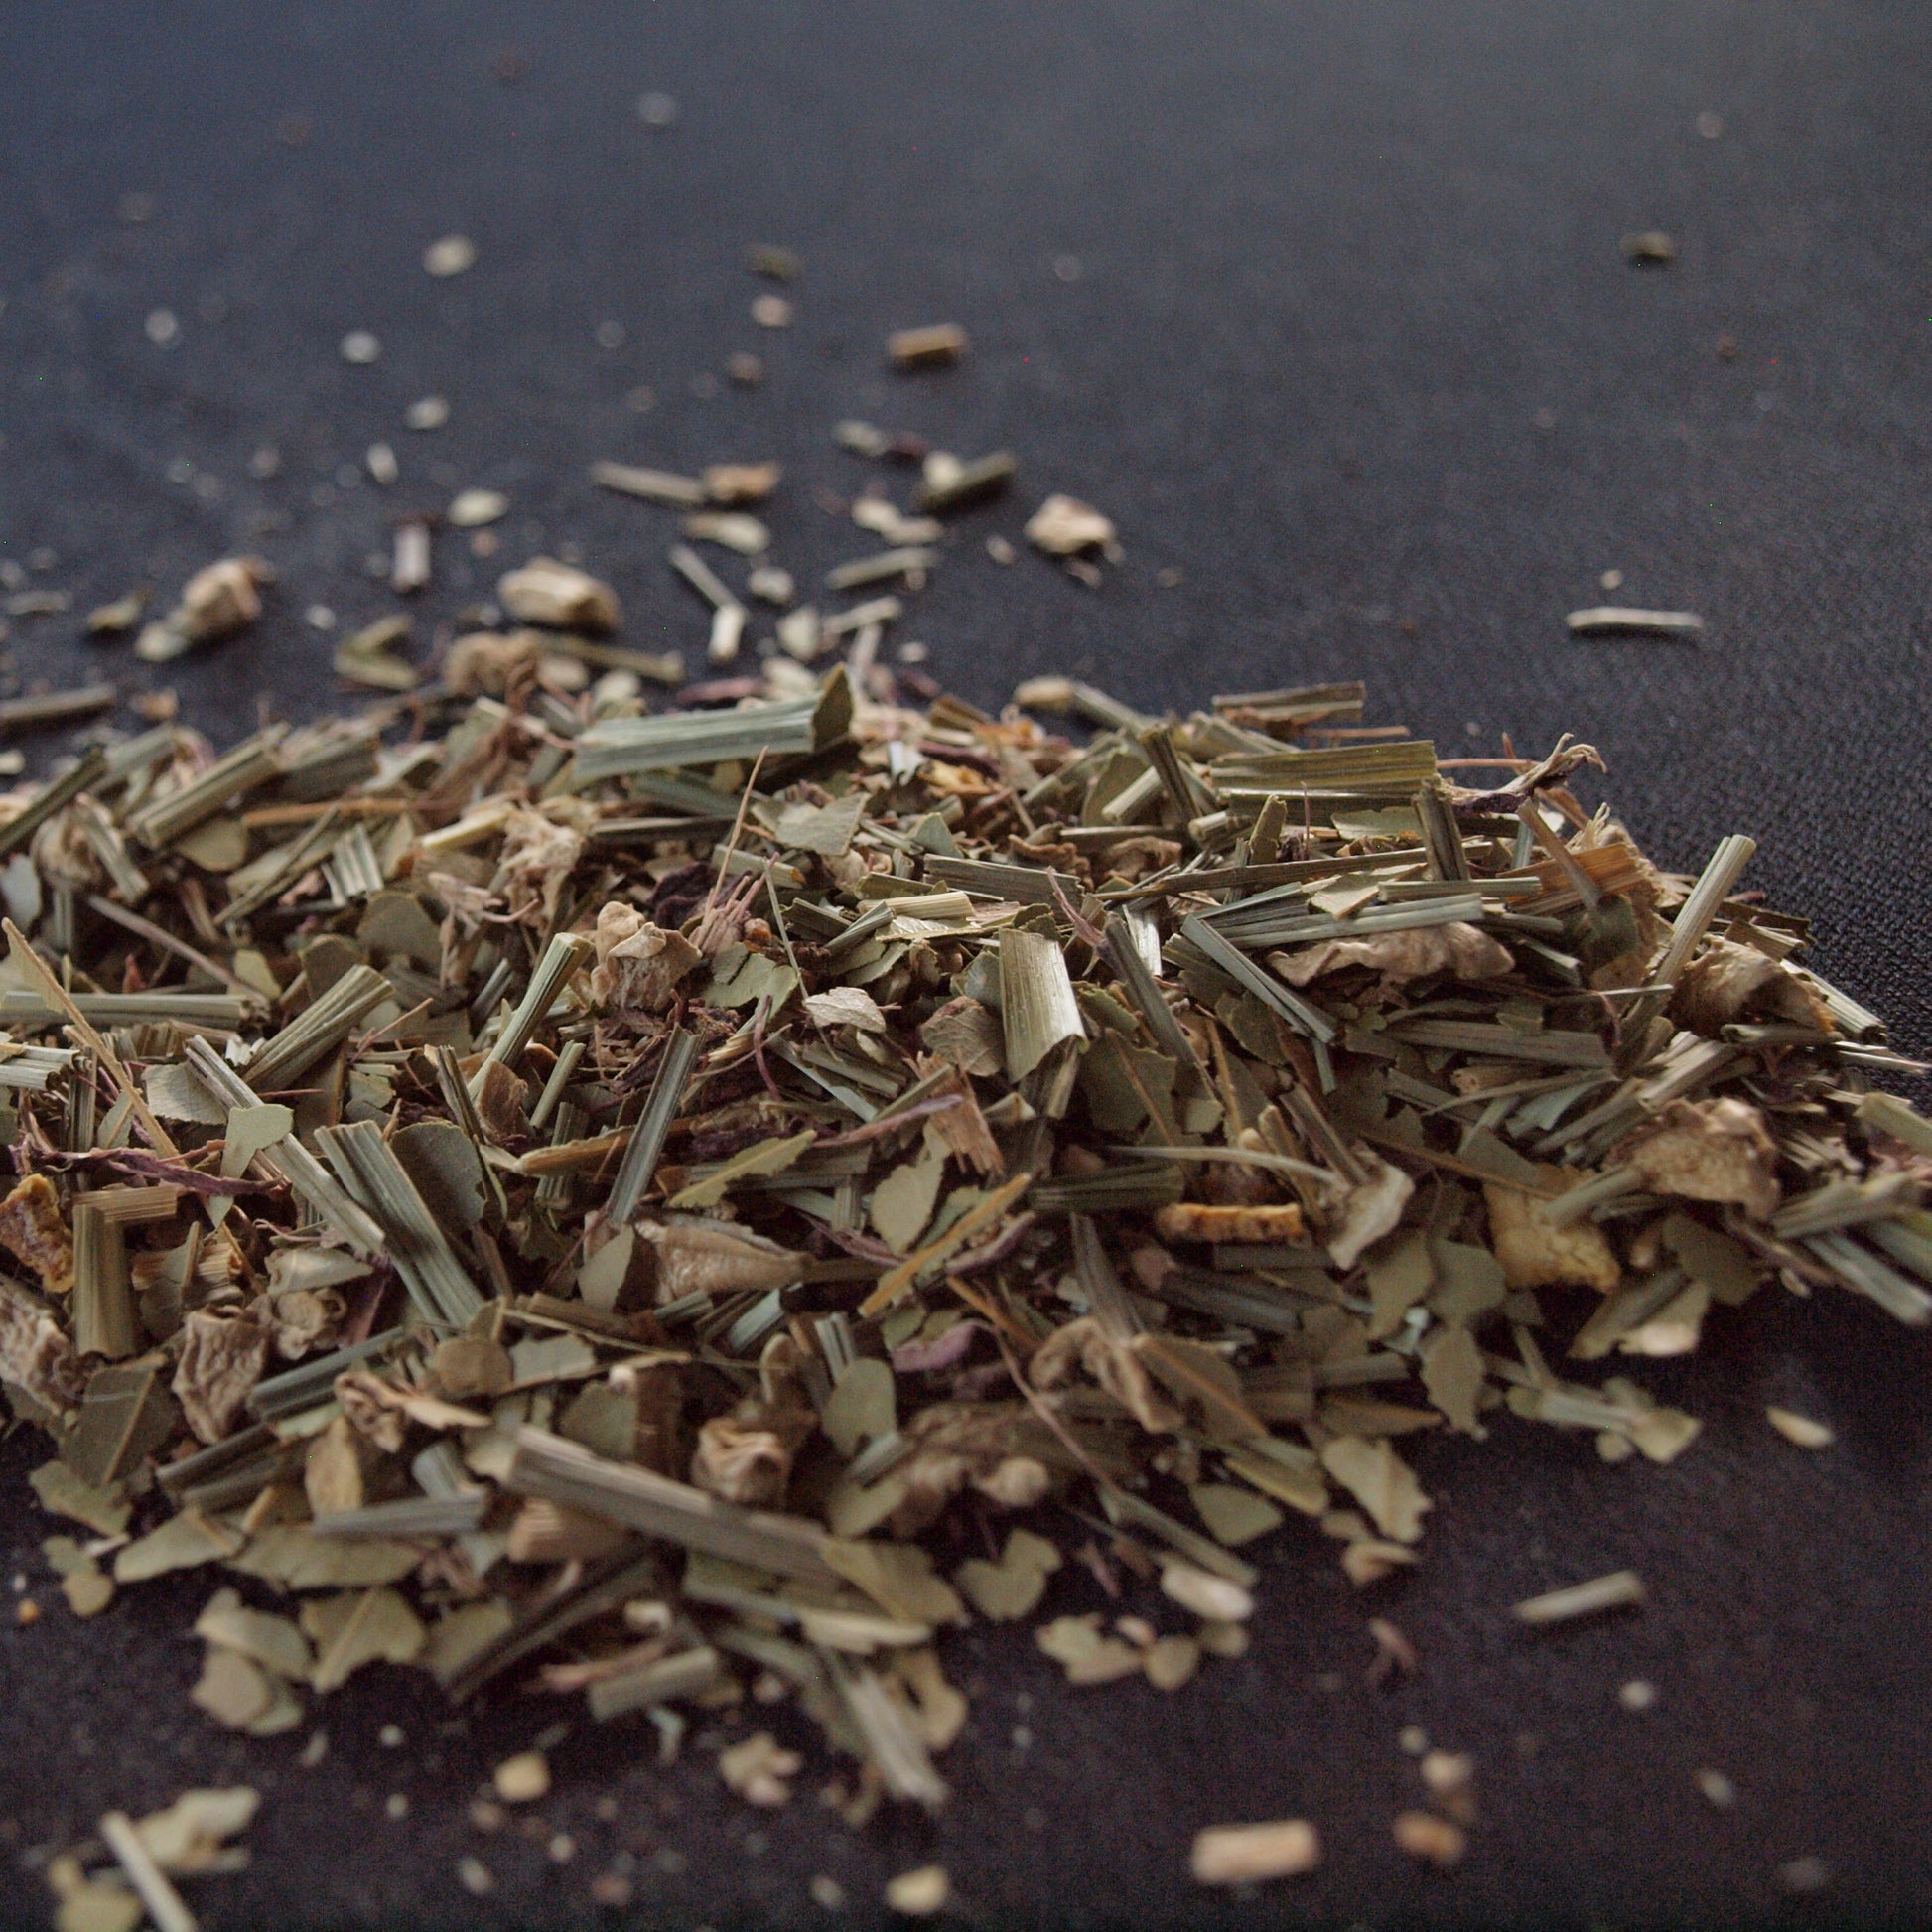 An arrangement of Celestial Chai (Decaf) tea ingredients spread out on a black background